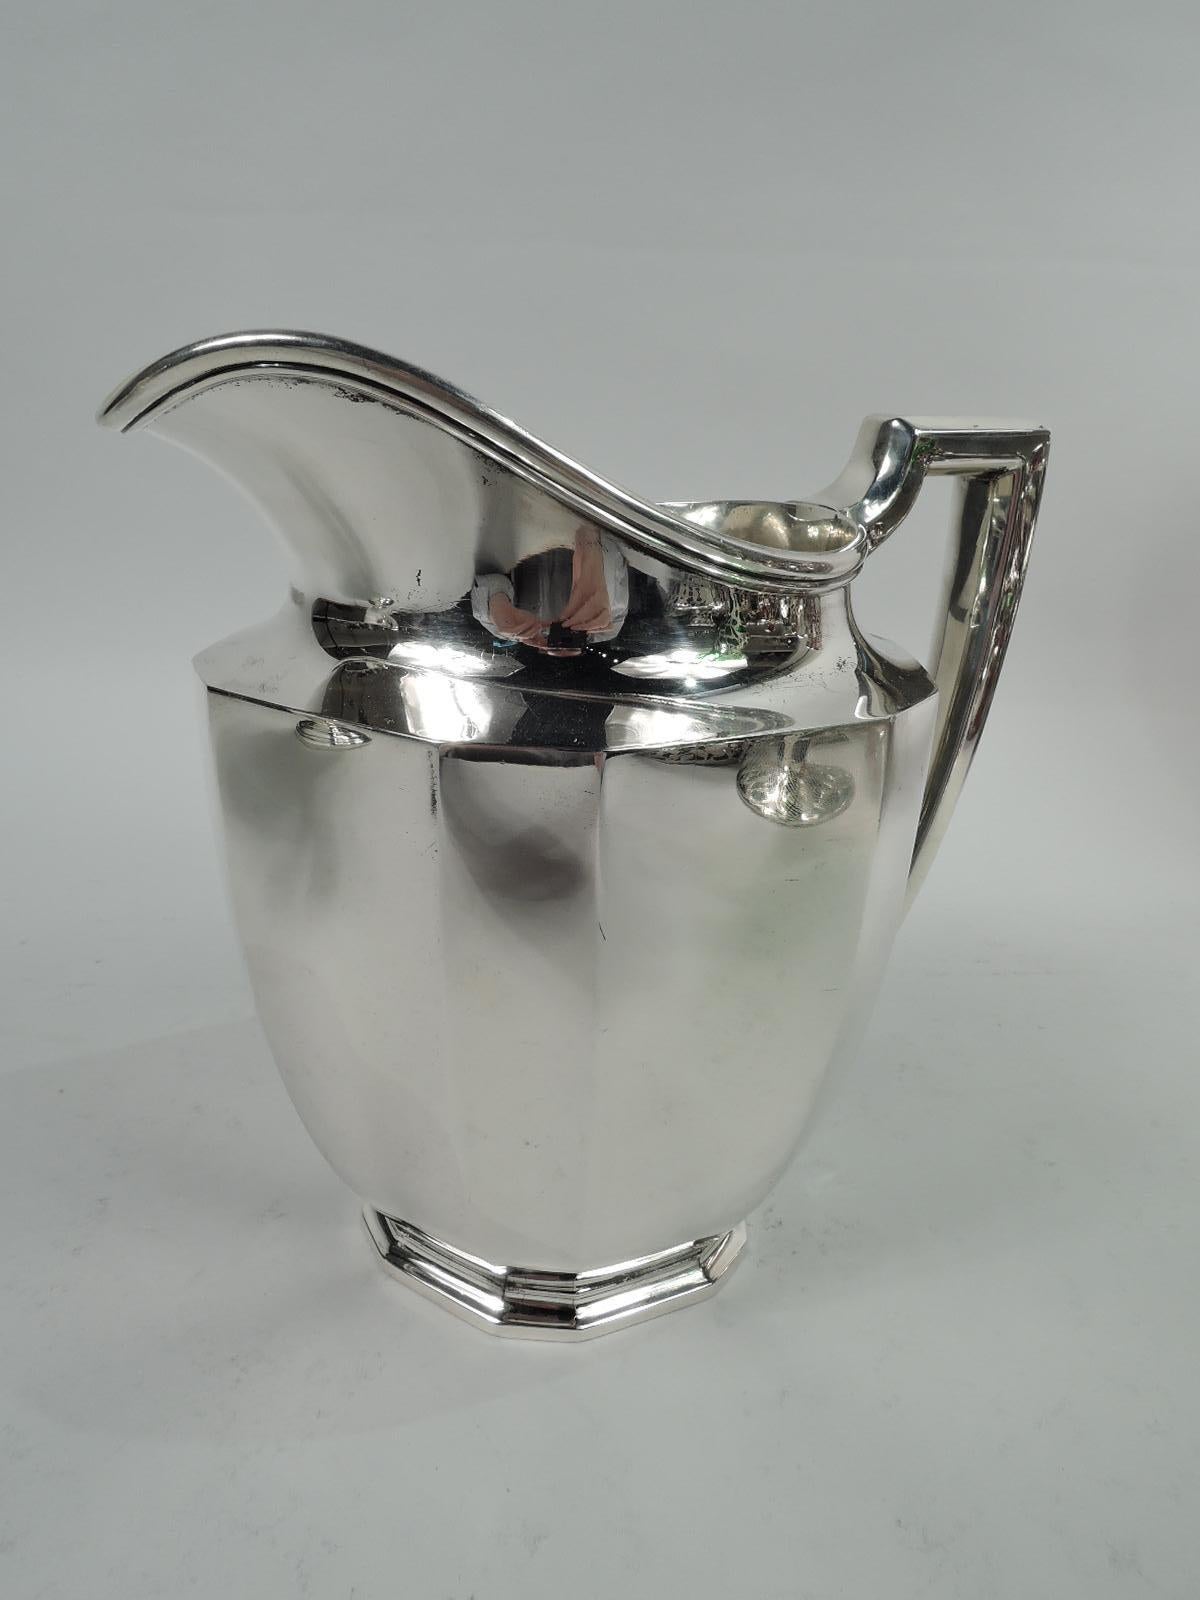 Art Deco sterling silver water pitcher. Made by Tiffany & Co. in New York, ca. 1914. Curved body, stepped foot, helmet mouth, and bracket handle. Alternating wide and narrow facets to body and foot. Fully marked including pattern no. 18799 (first